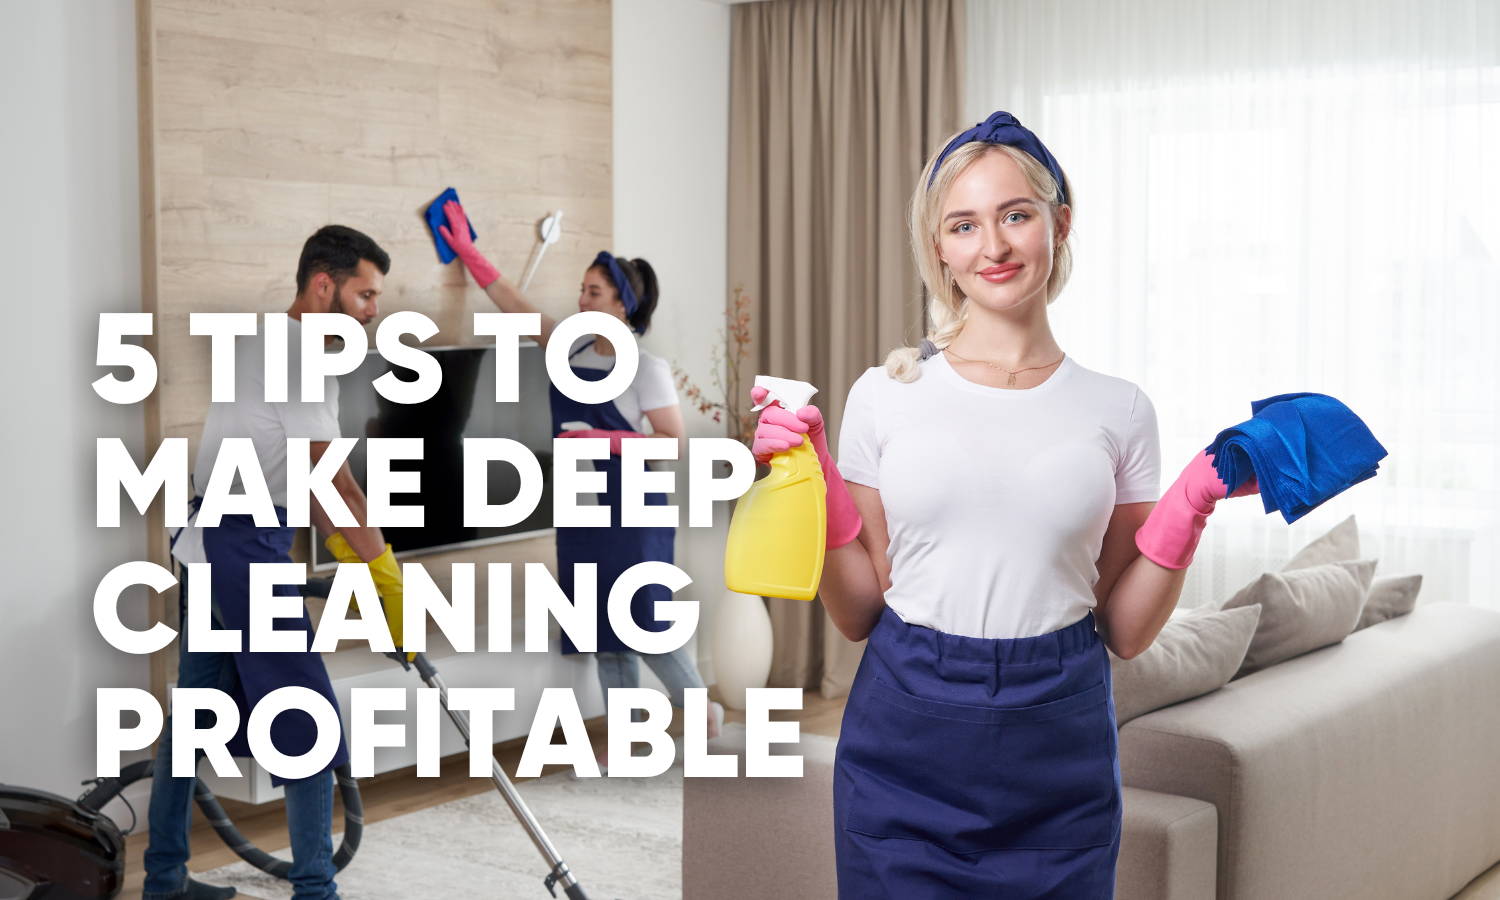 5 Tips to Make Deep Cleaning Profitable